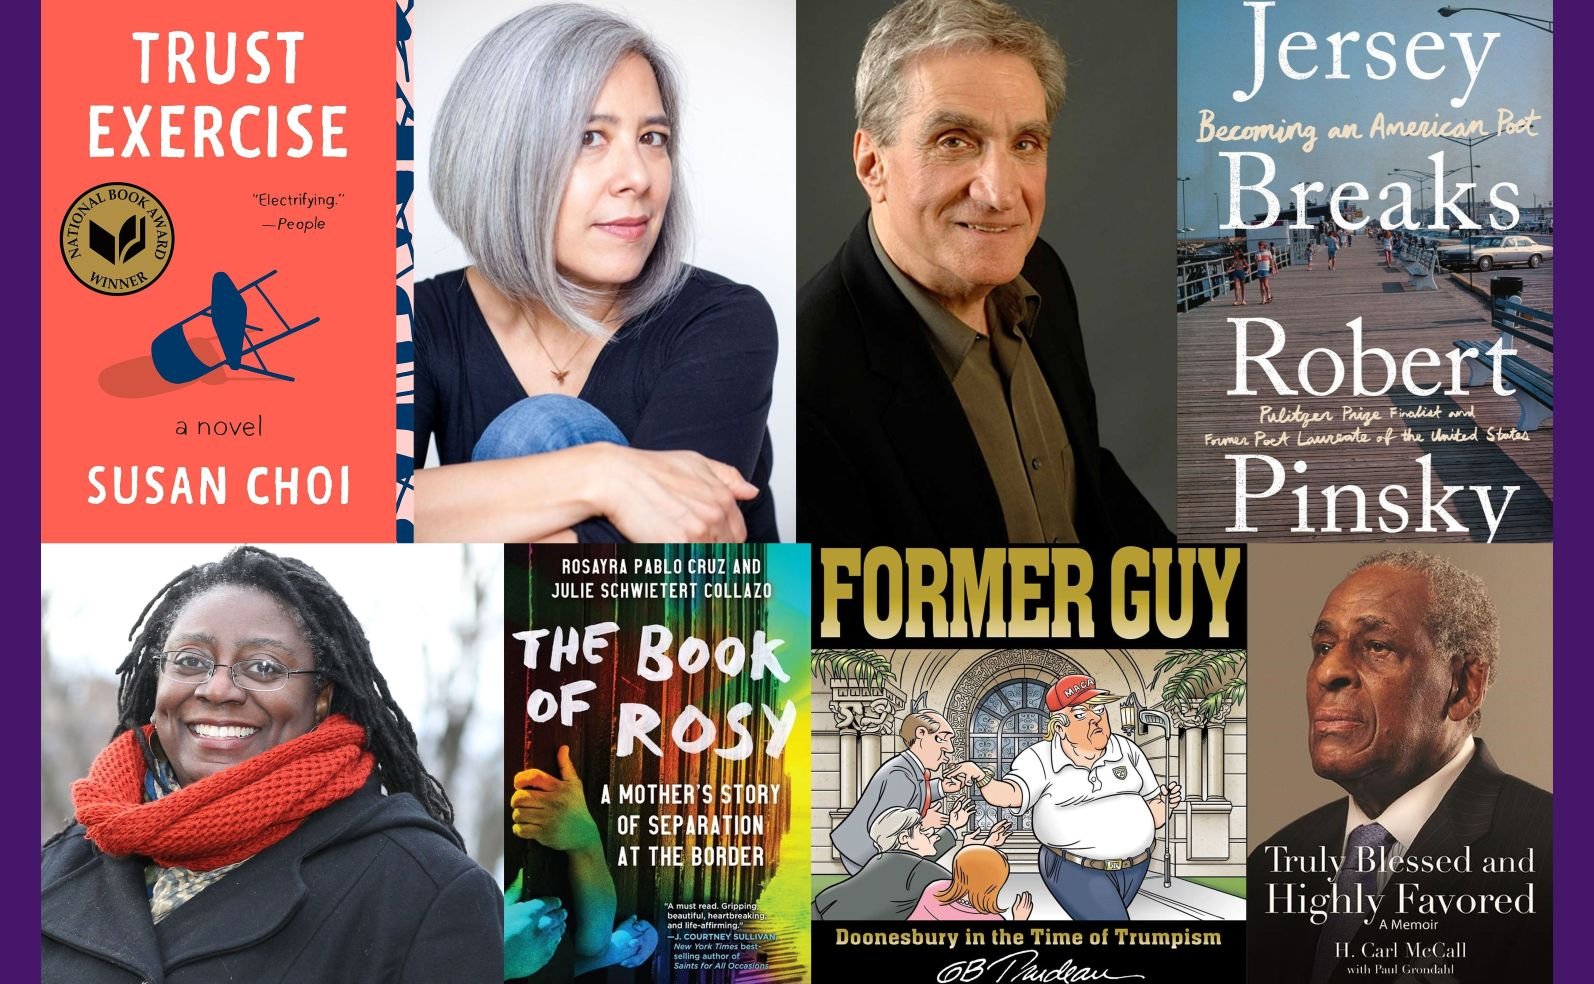 Albany Book Festival to Bring AwardWinning Authors to Campus Saturday